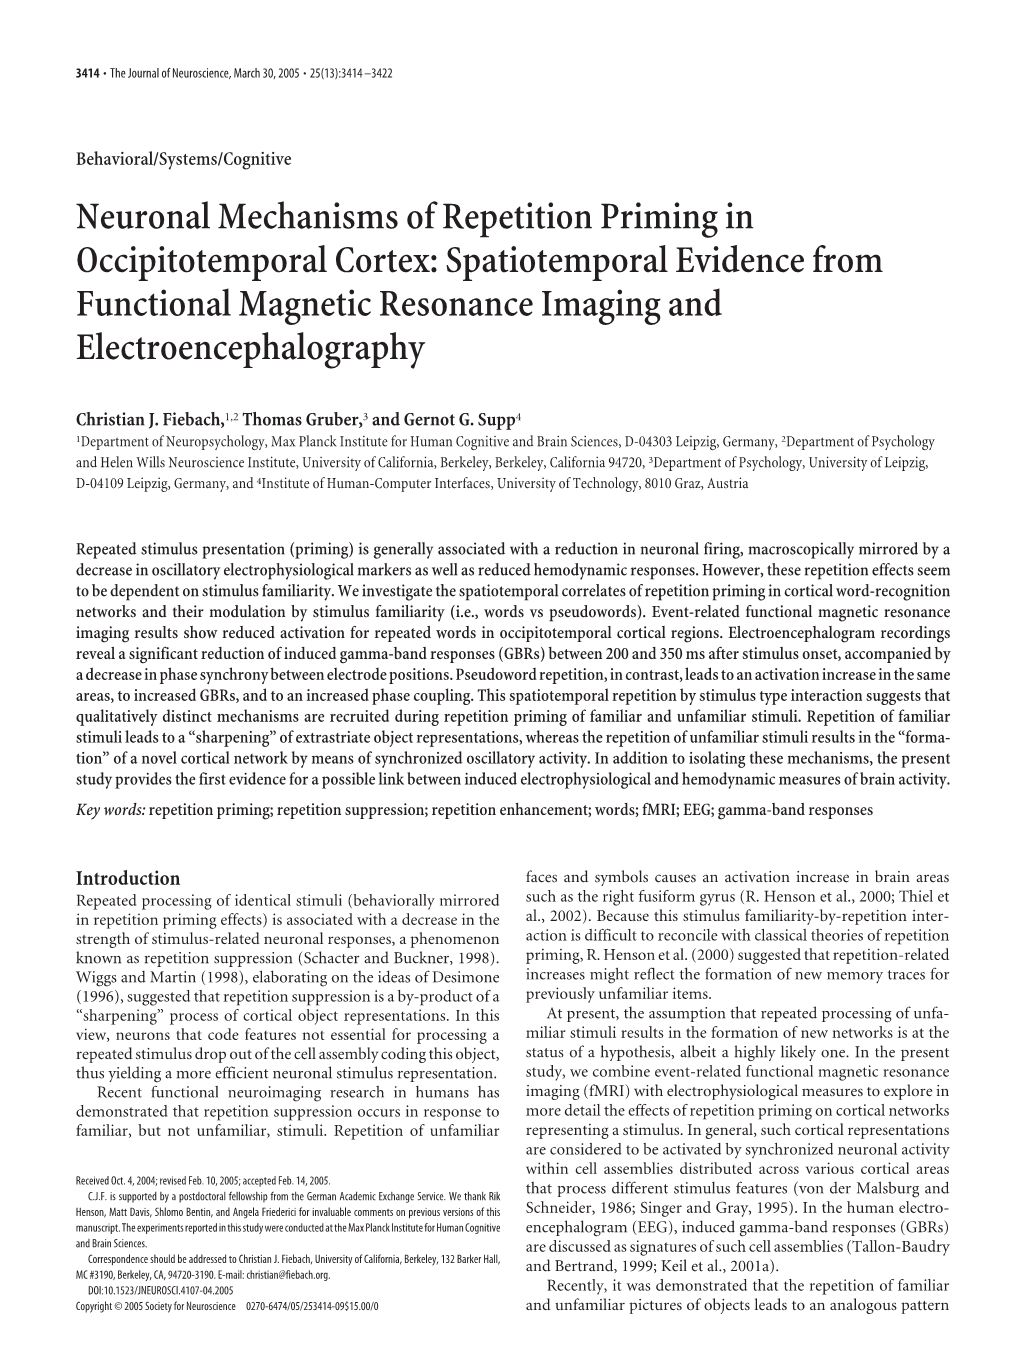 Neuronal Mechanisms of Repetition Priming in Occipitotemporal Cortex: Spatiotemporal Evidence from Functional Magnetic Resonance Imaging and Electroencephalography